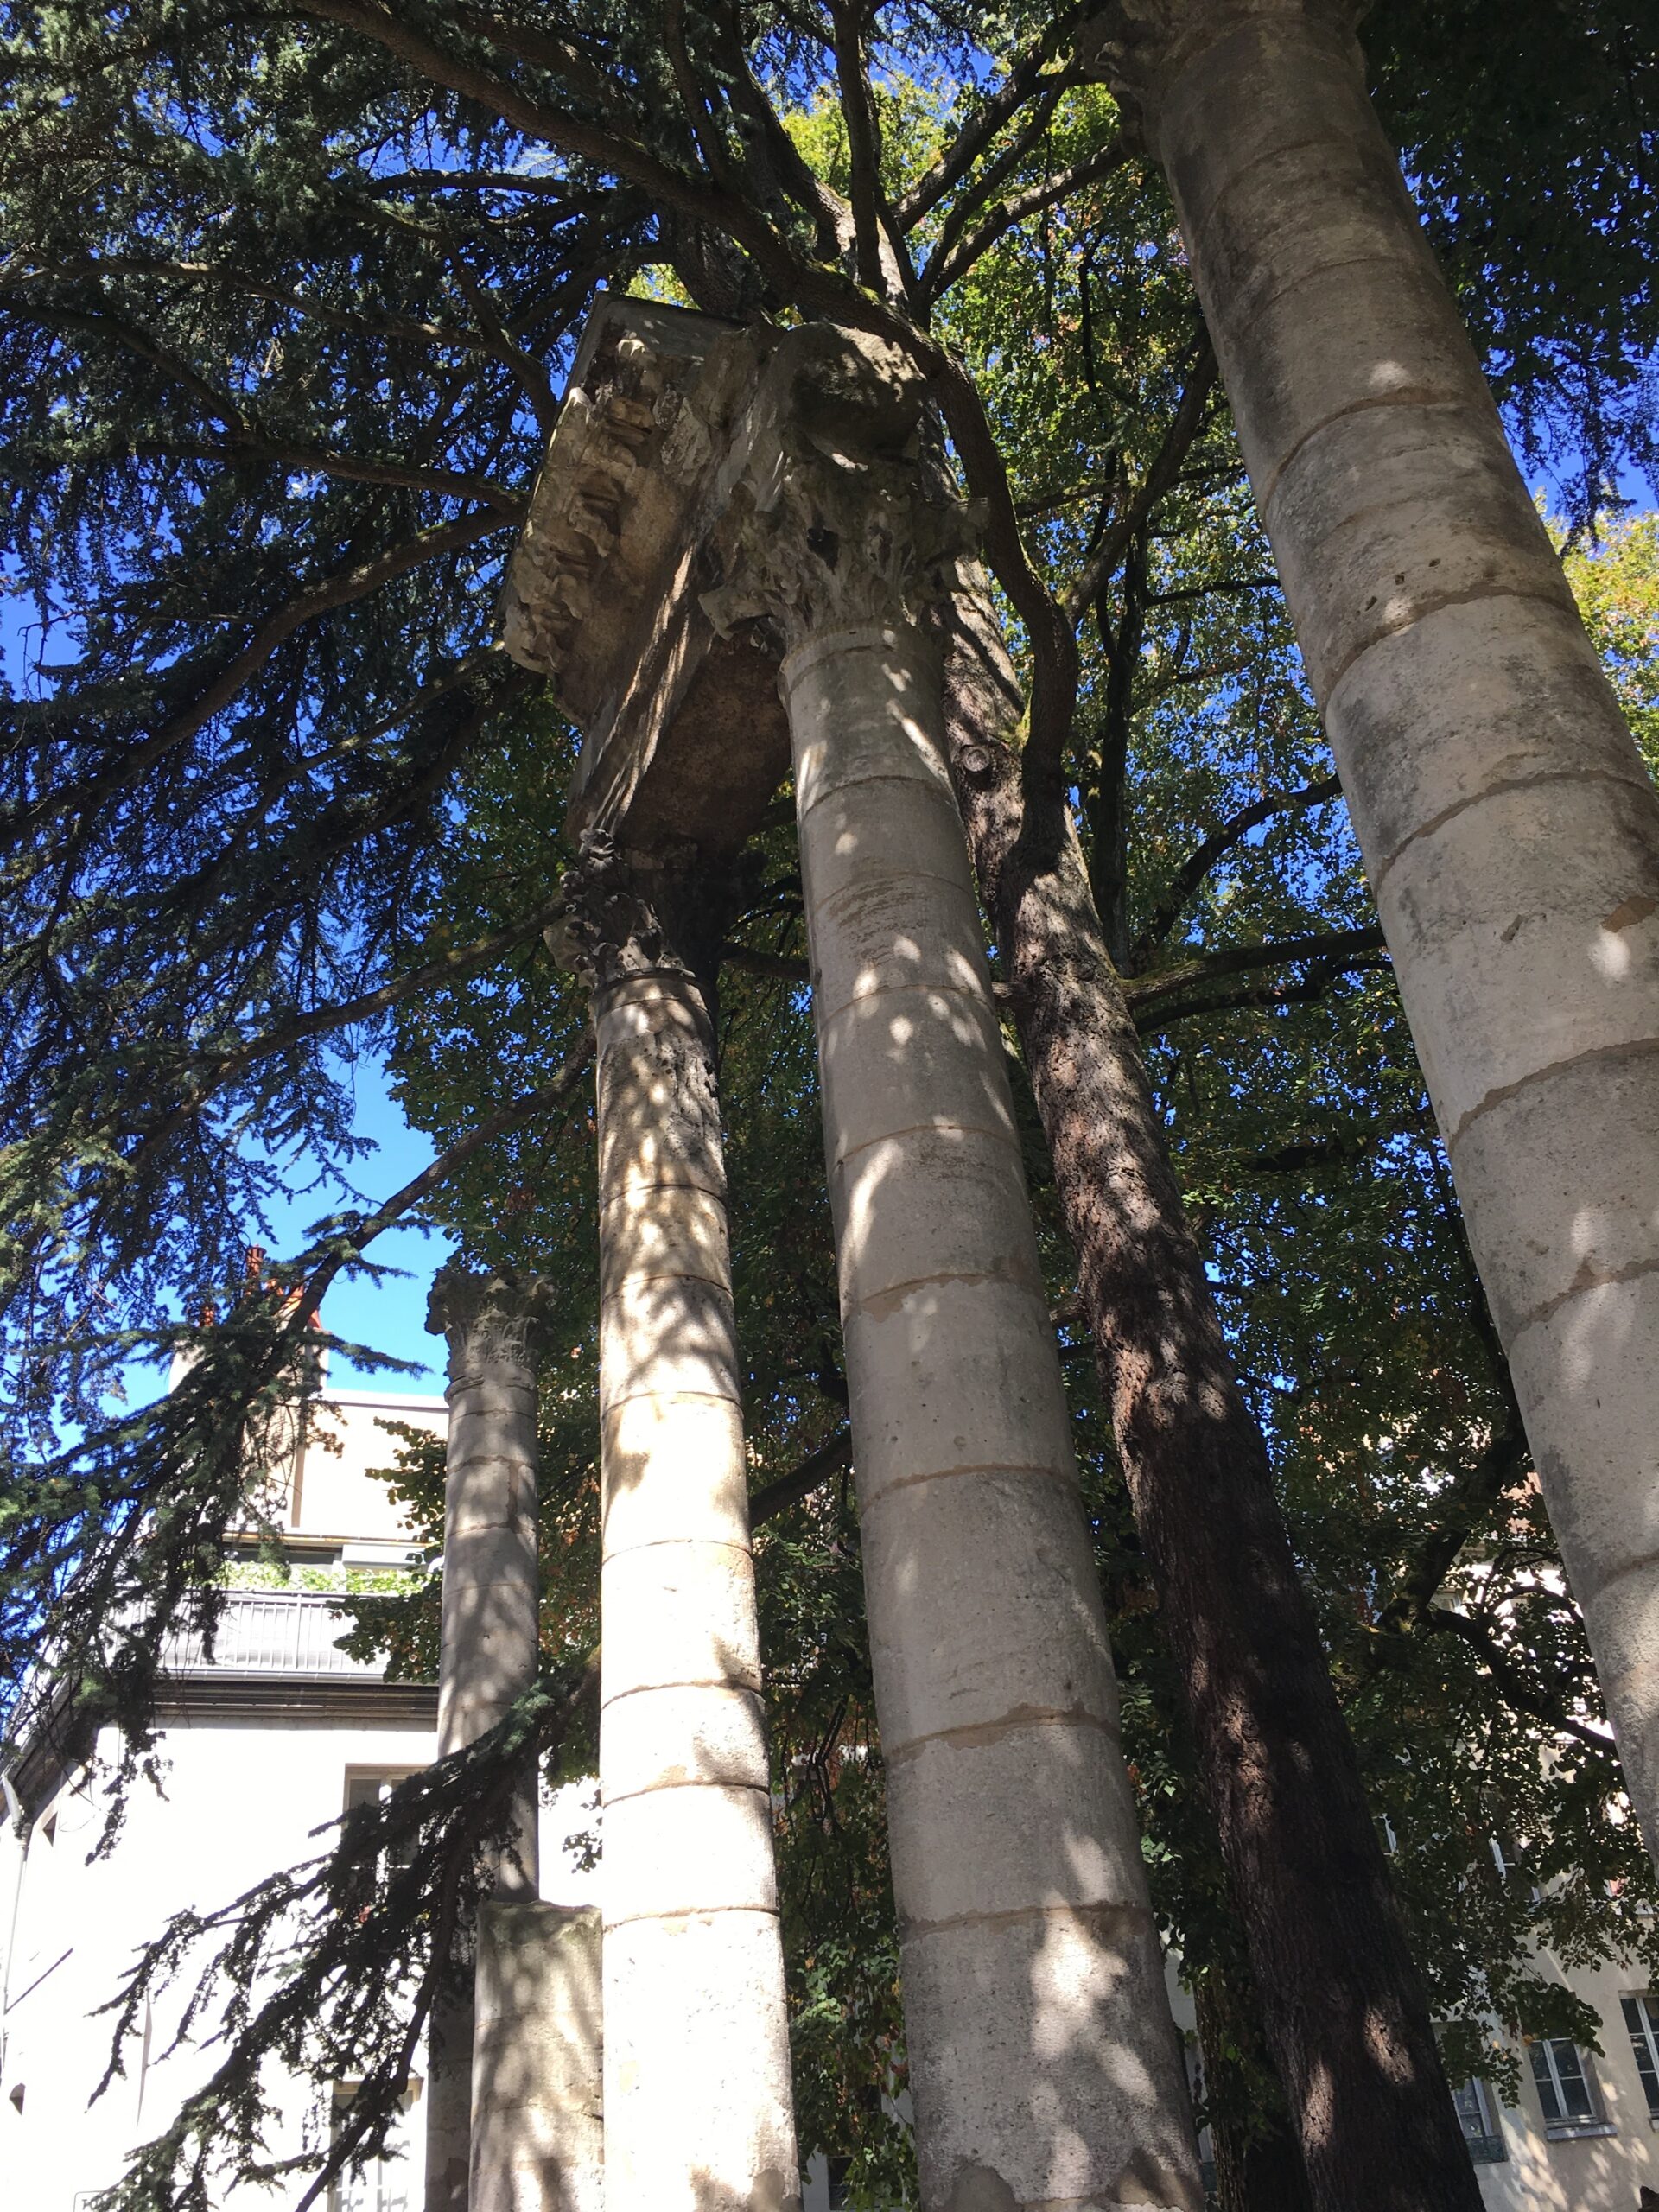 upward angled photo of columns in front of trees